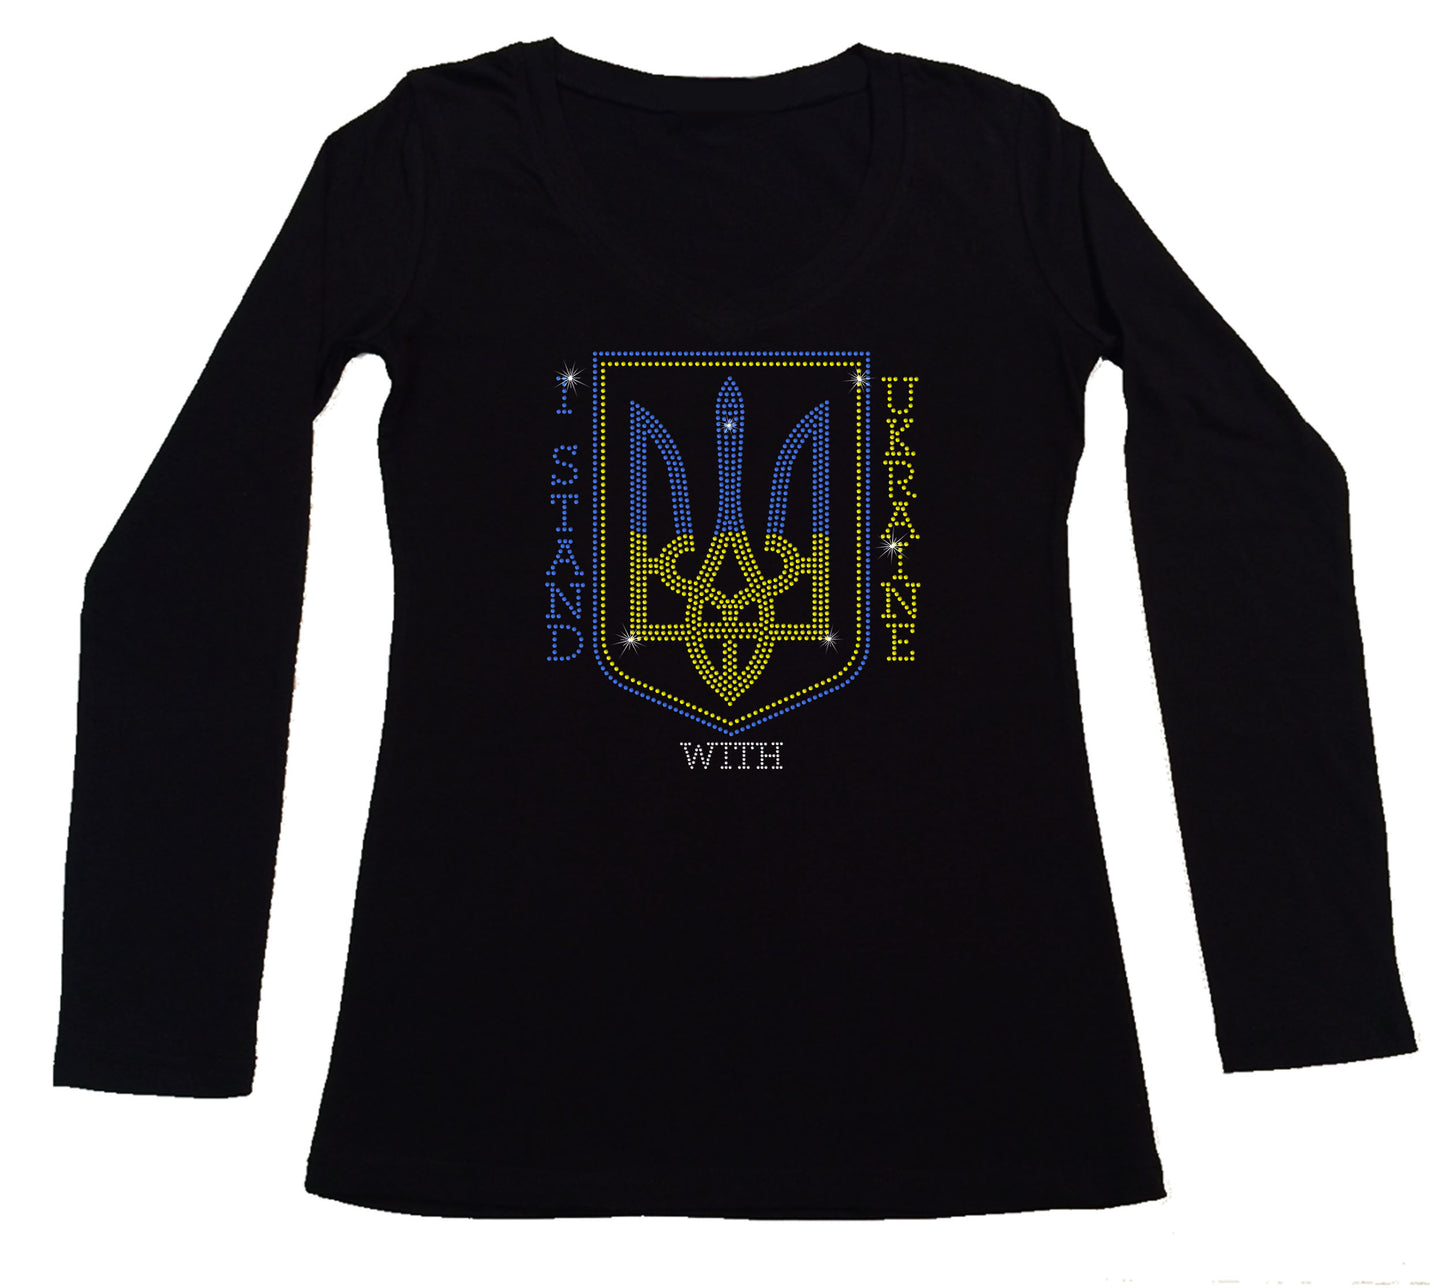 Women's Rhinestone Fitted Tight Snug Shirt I Stand with Ukraine - Trident, Support for Ukraine